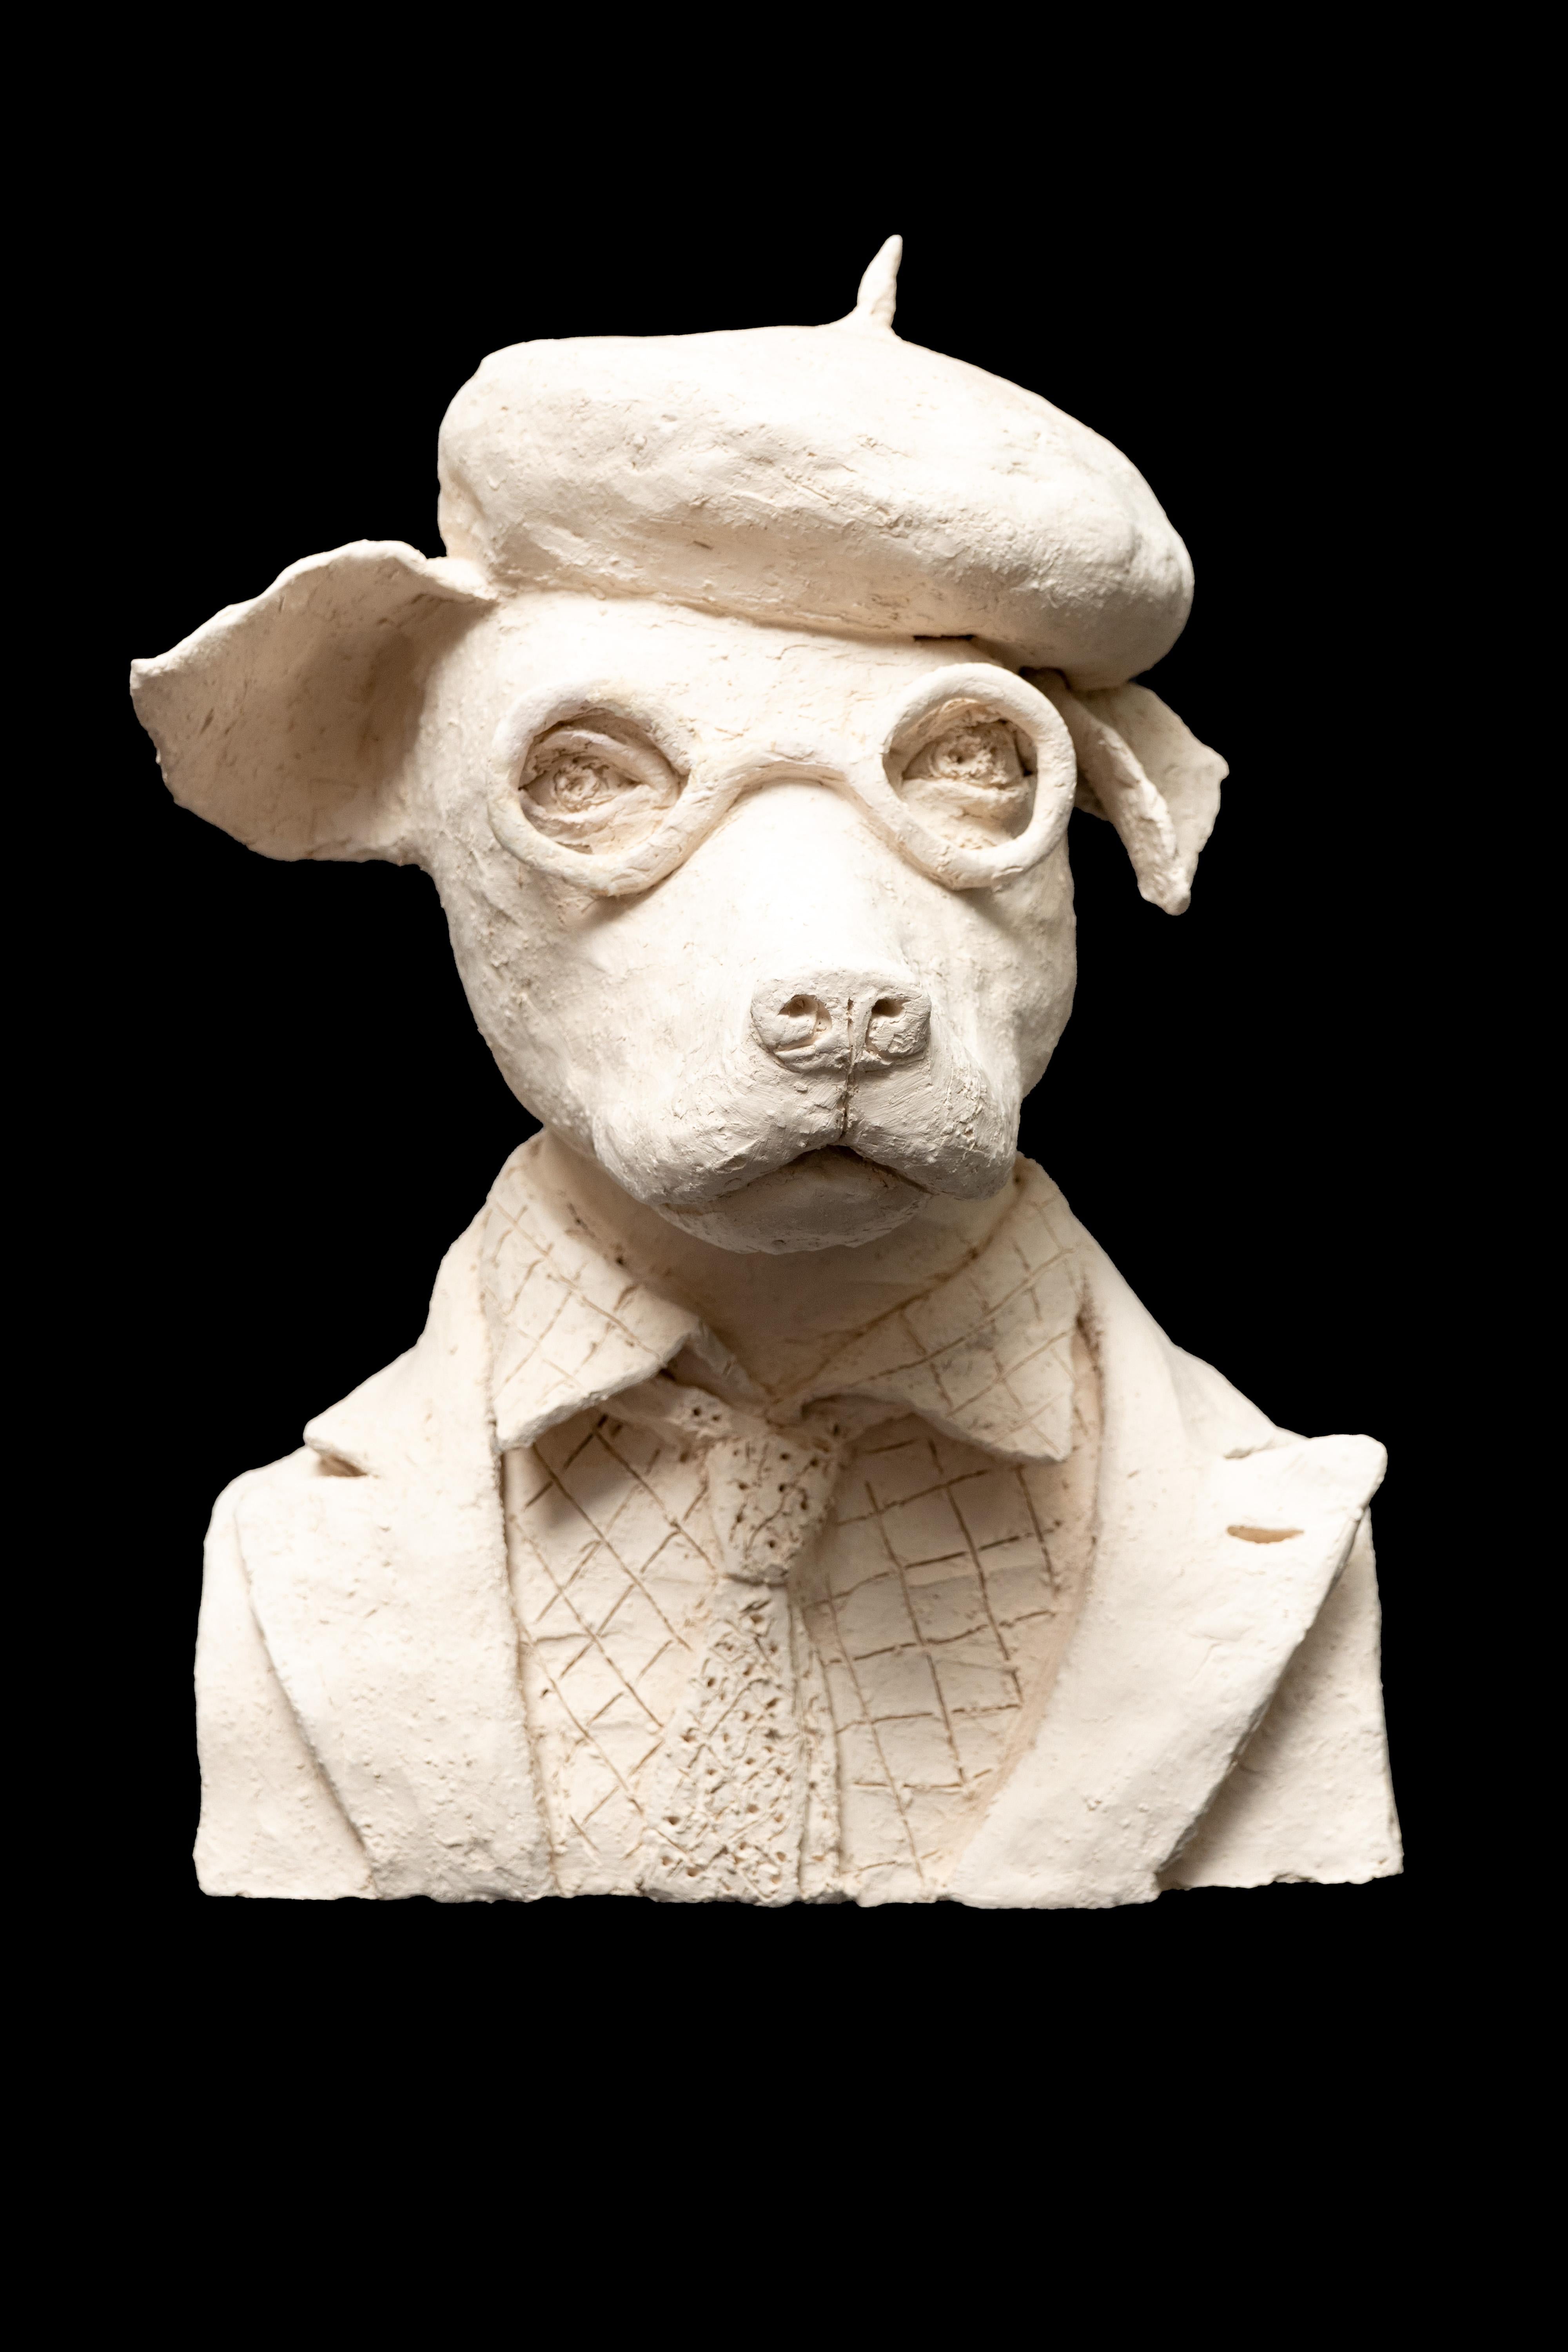 Terracotta Anthropomorphic Bust of Dog with Beret and eyeglasses. A charming one-of-a-kind sculpture made in France. Measure: 13